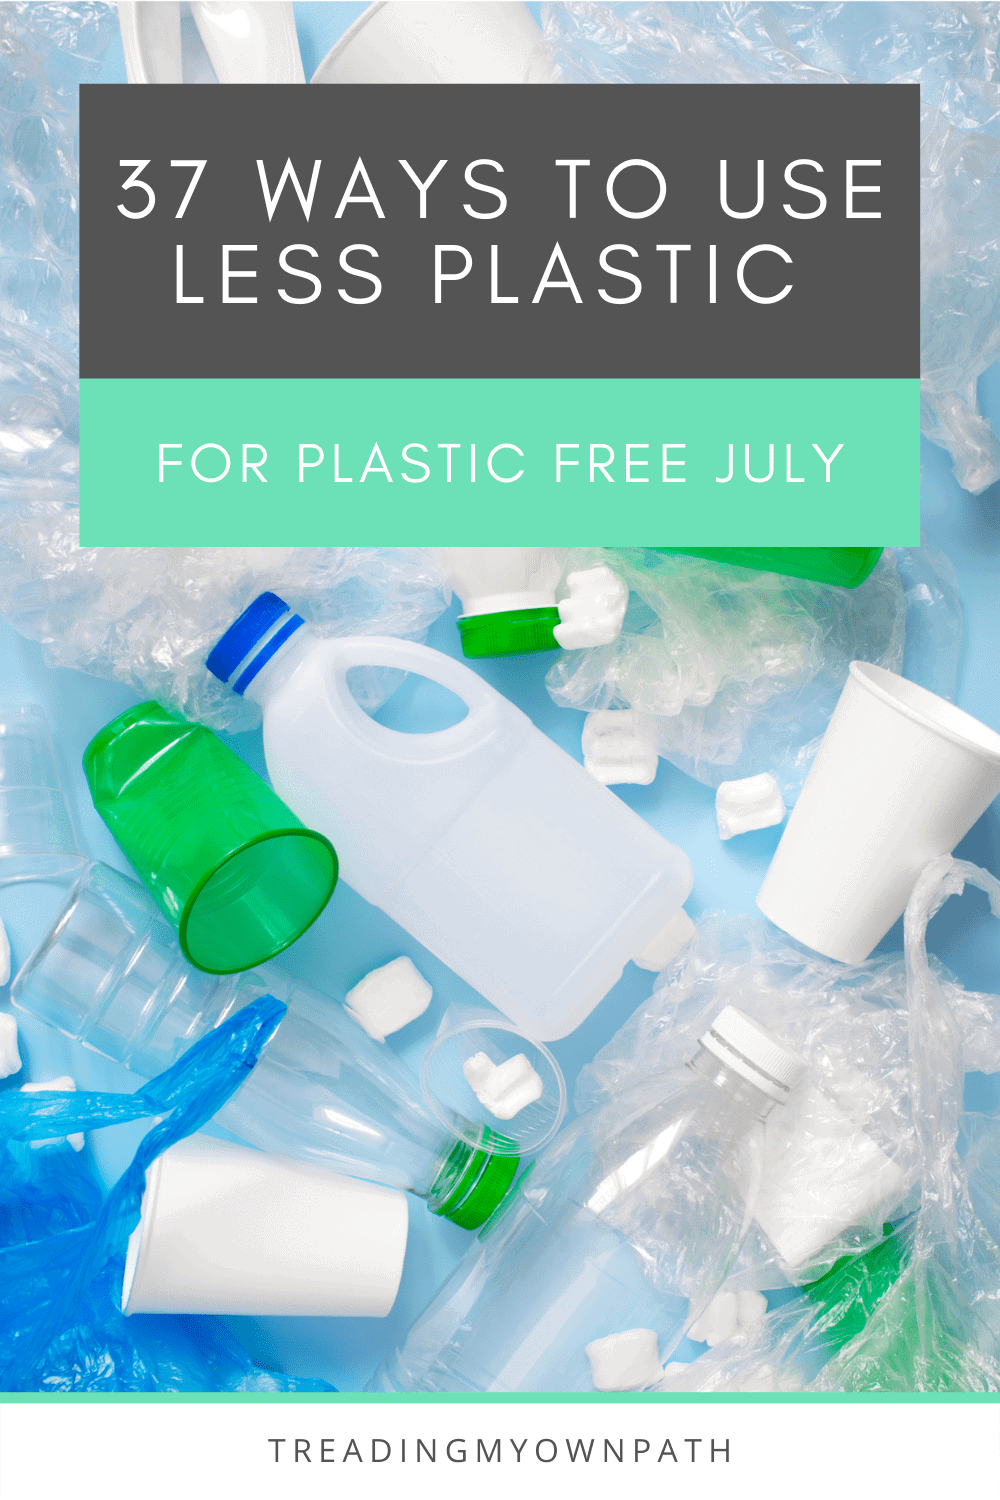 37 ways to use less plastic in 2021